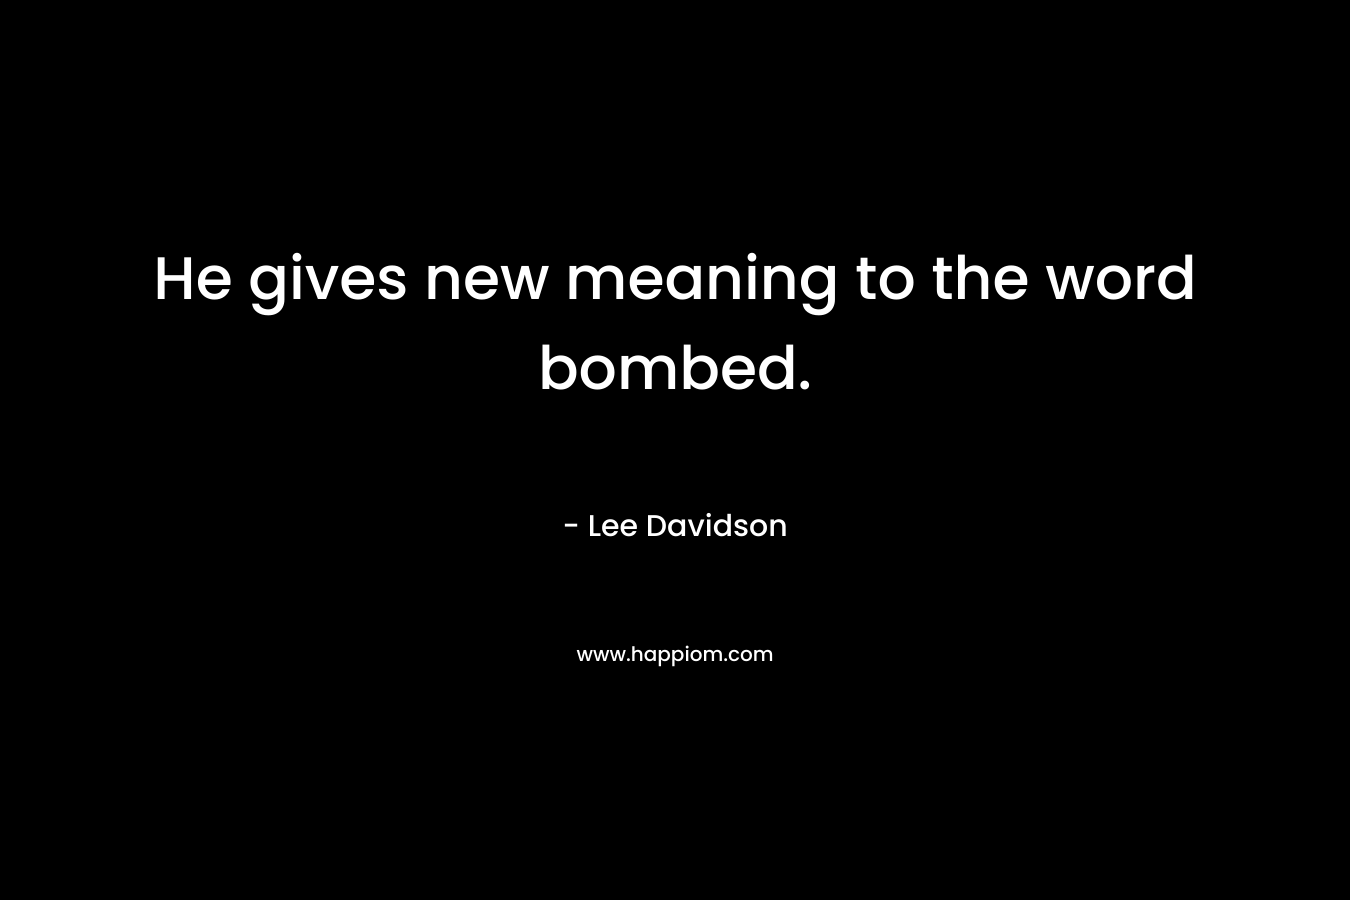 He gives new meaning to the word bombed. – Lee Davidson